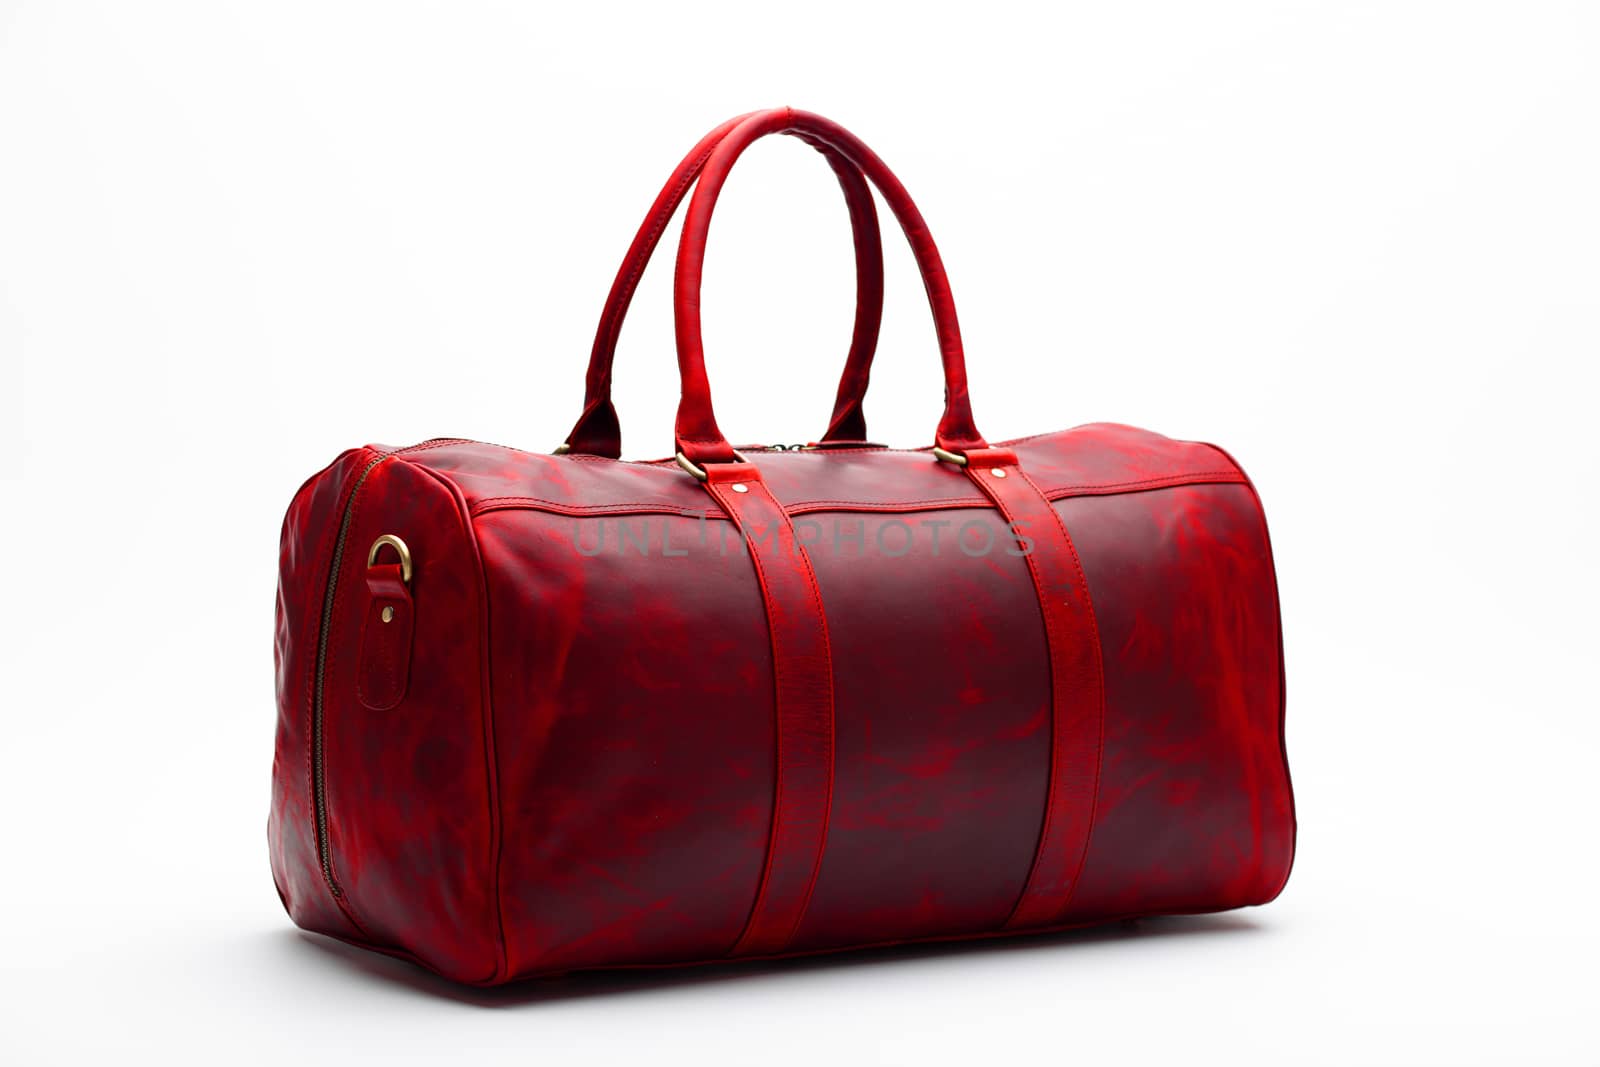 duffel bag travel case leather holdall valise fashion modern carry handle